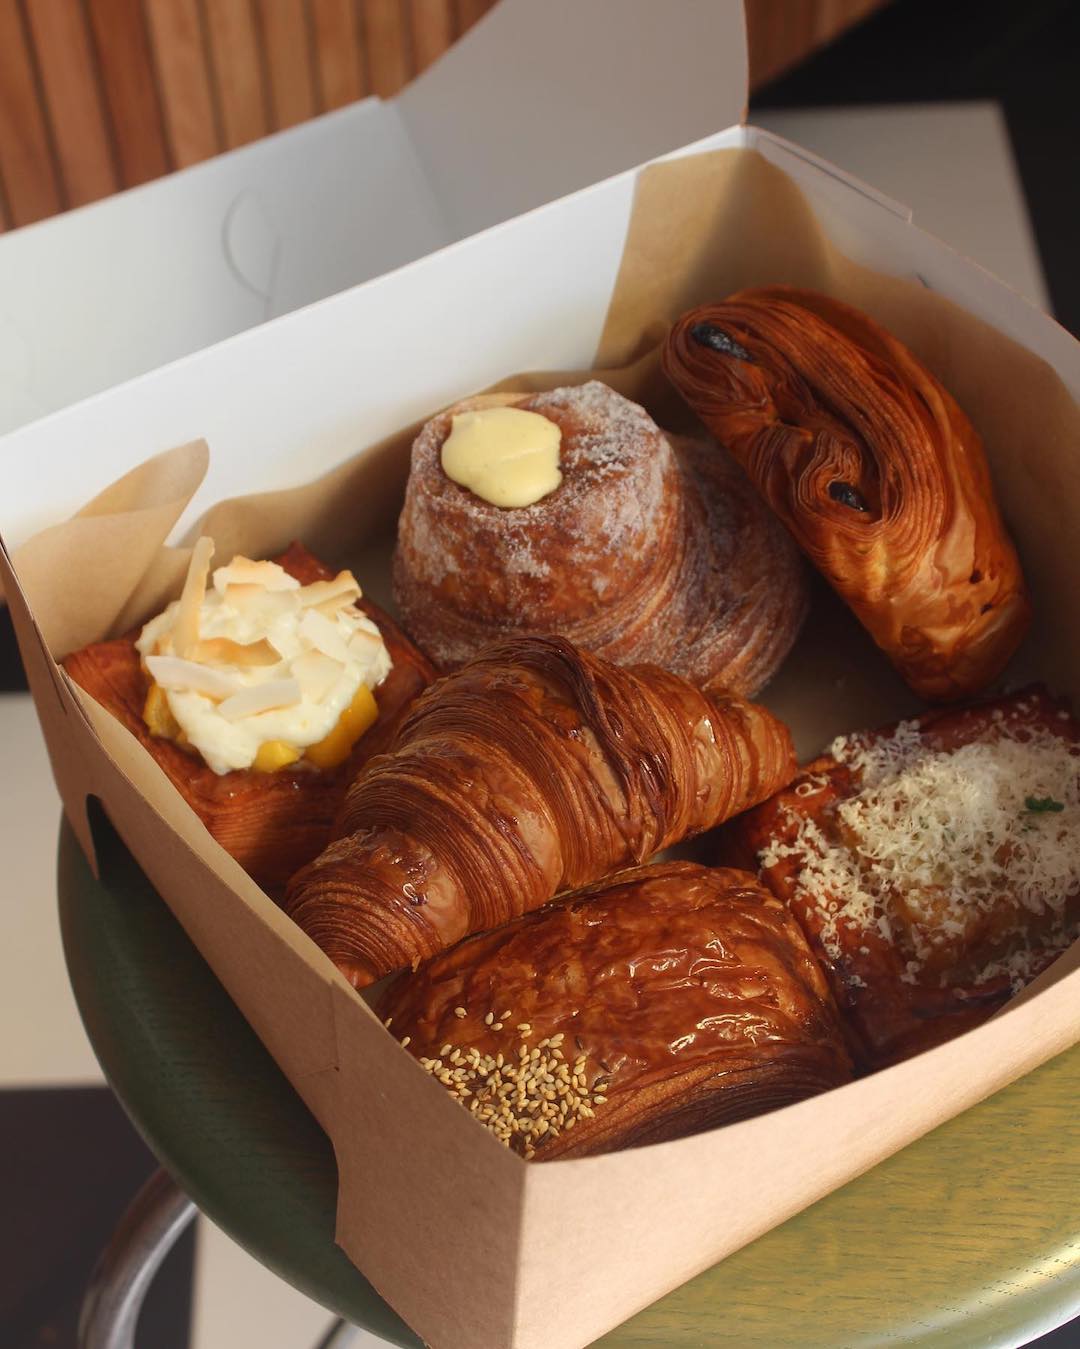 A box of baked goods from Teeter Bakery in East Perth